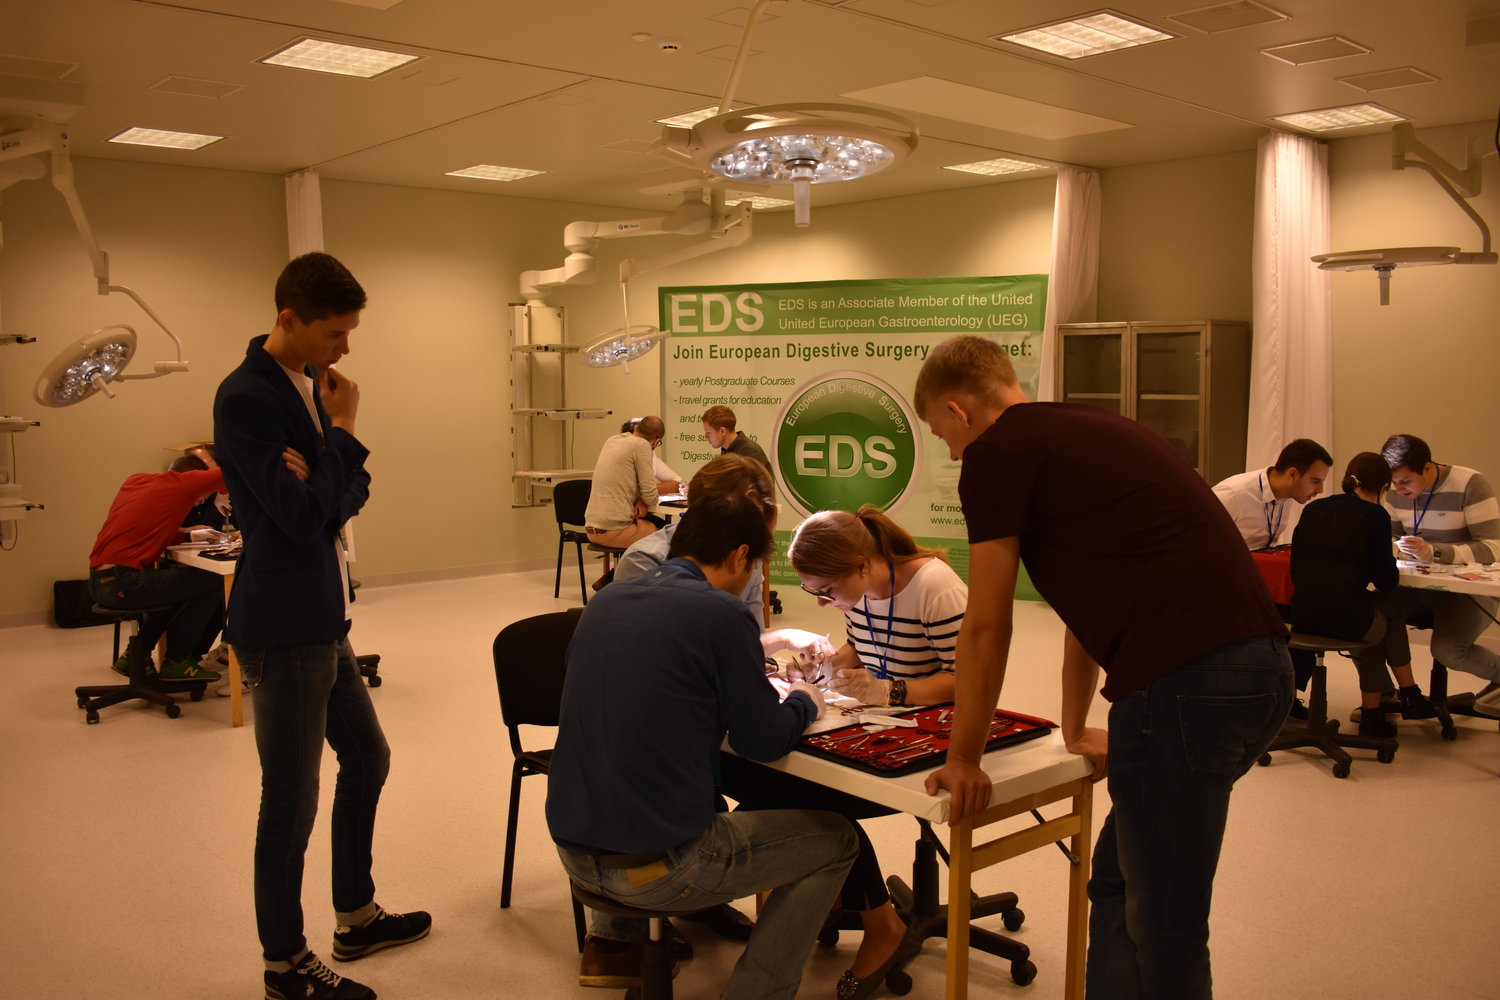 Impressions from the 2nd day of EDS Surgical Skills Course in Kaunas, Lithuania.